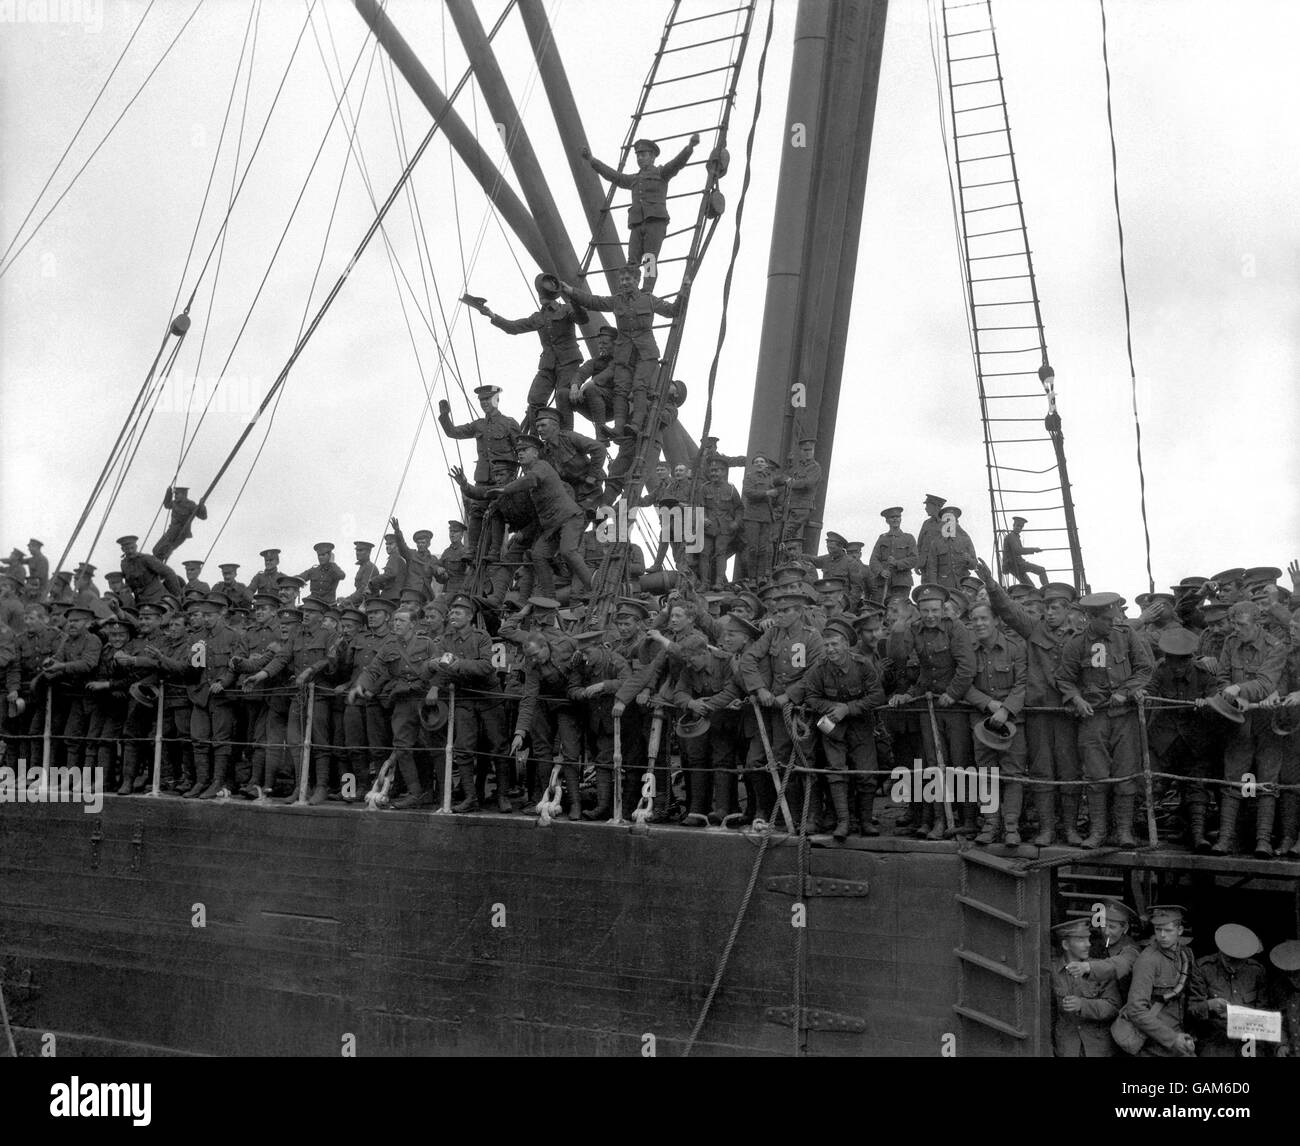 British soldiers arrive by troopship at the French port of St. Nazaire during the First World War. Stock Photo